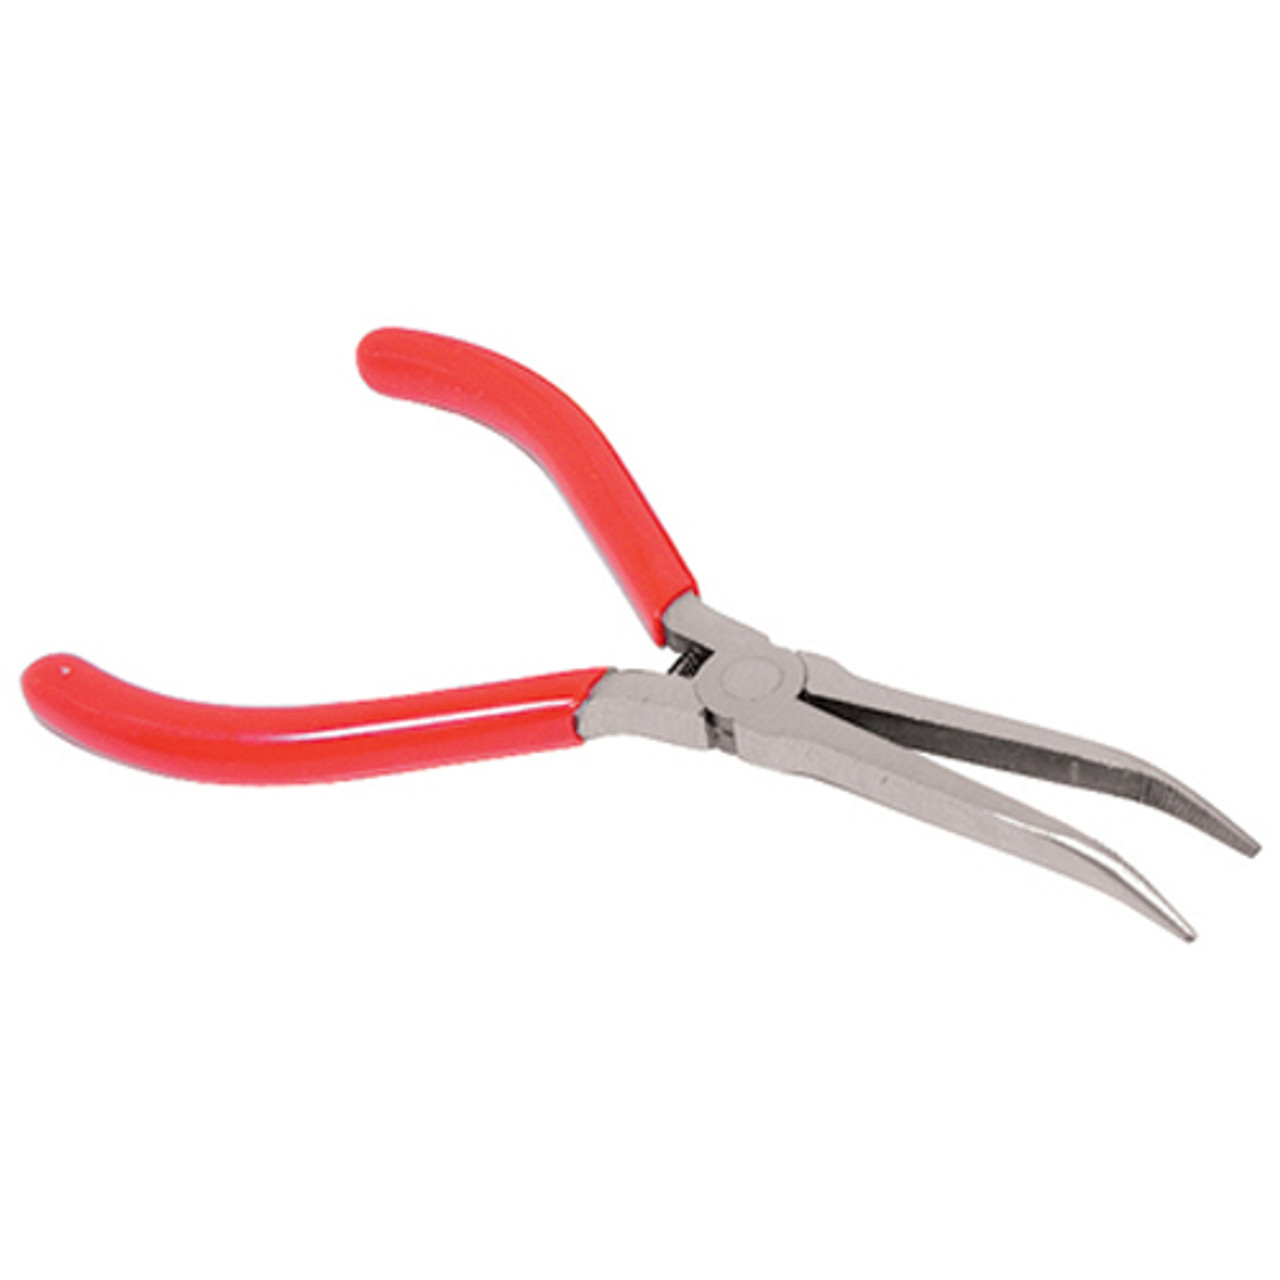 K Tool 51206 Needle Nose Pliers, 6 Long, Bent Nose, with Side Cutter,  Vinyl Grips